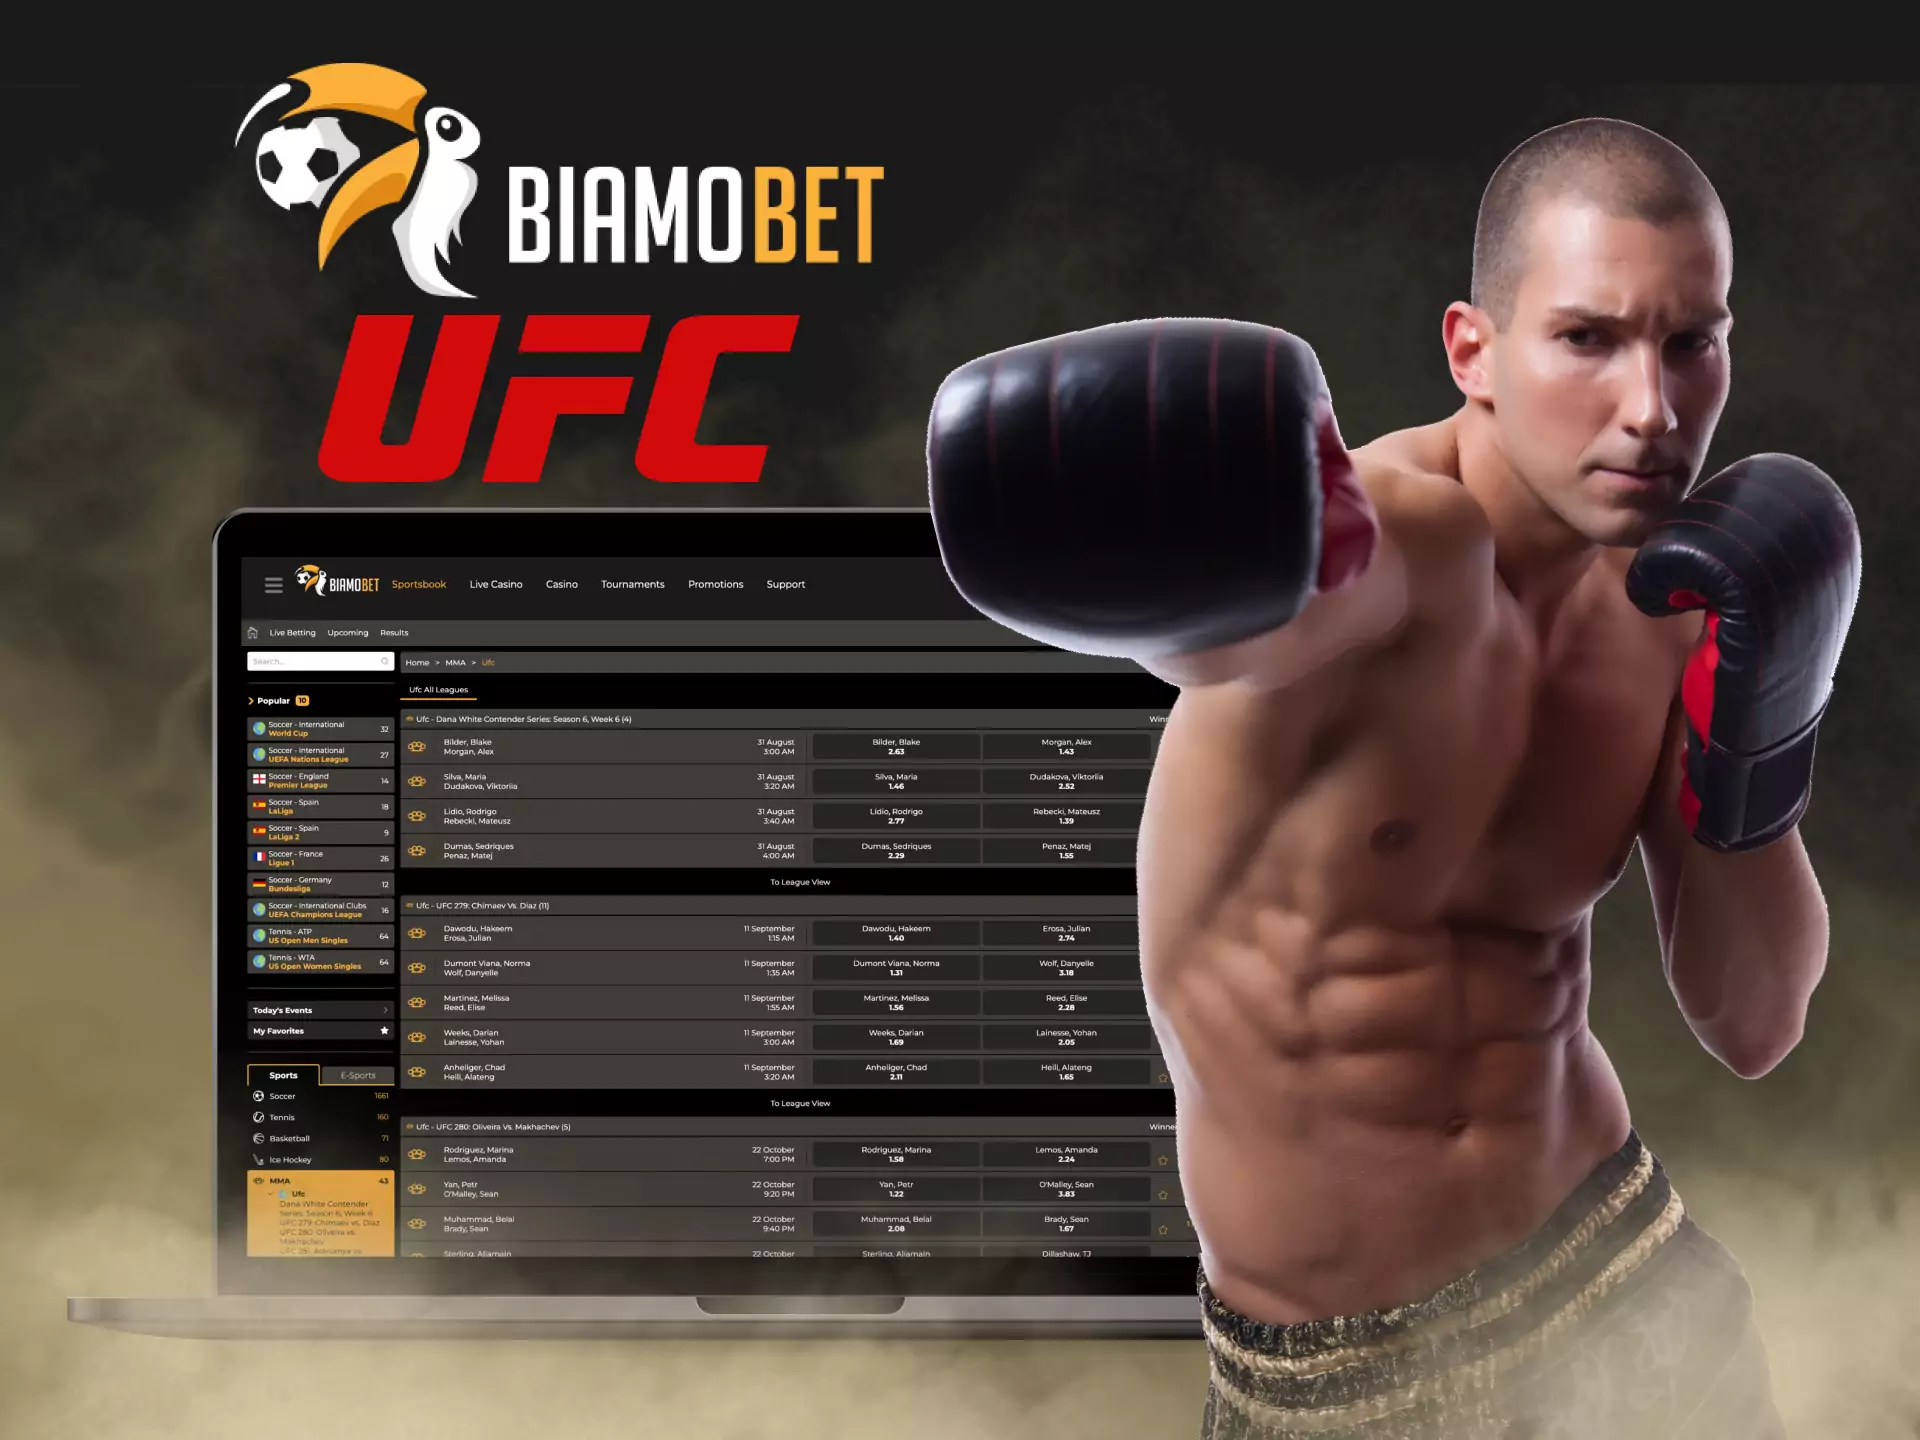 You can place a bet on UFC fights on the Biamobet website.